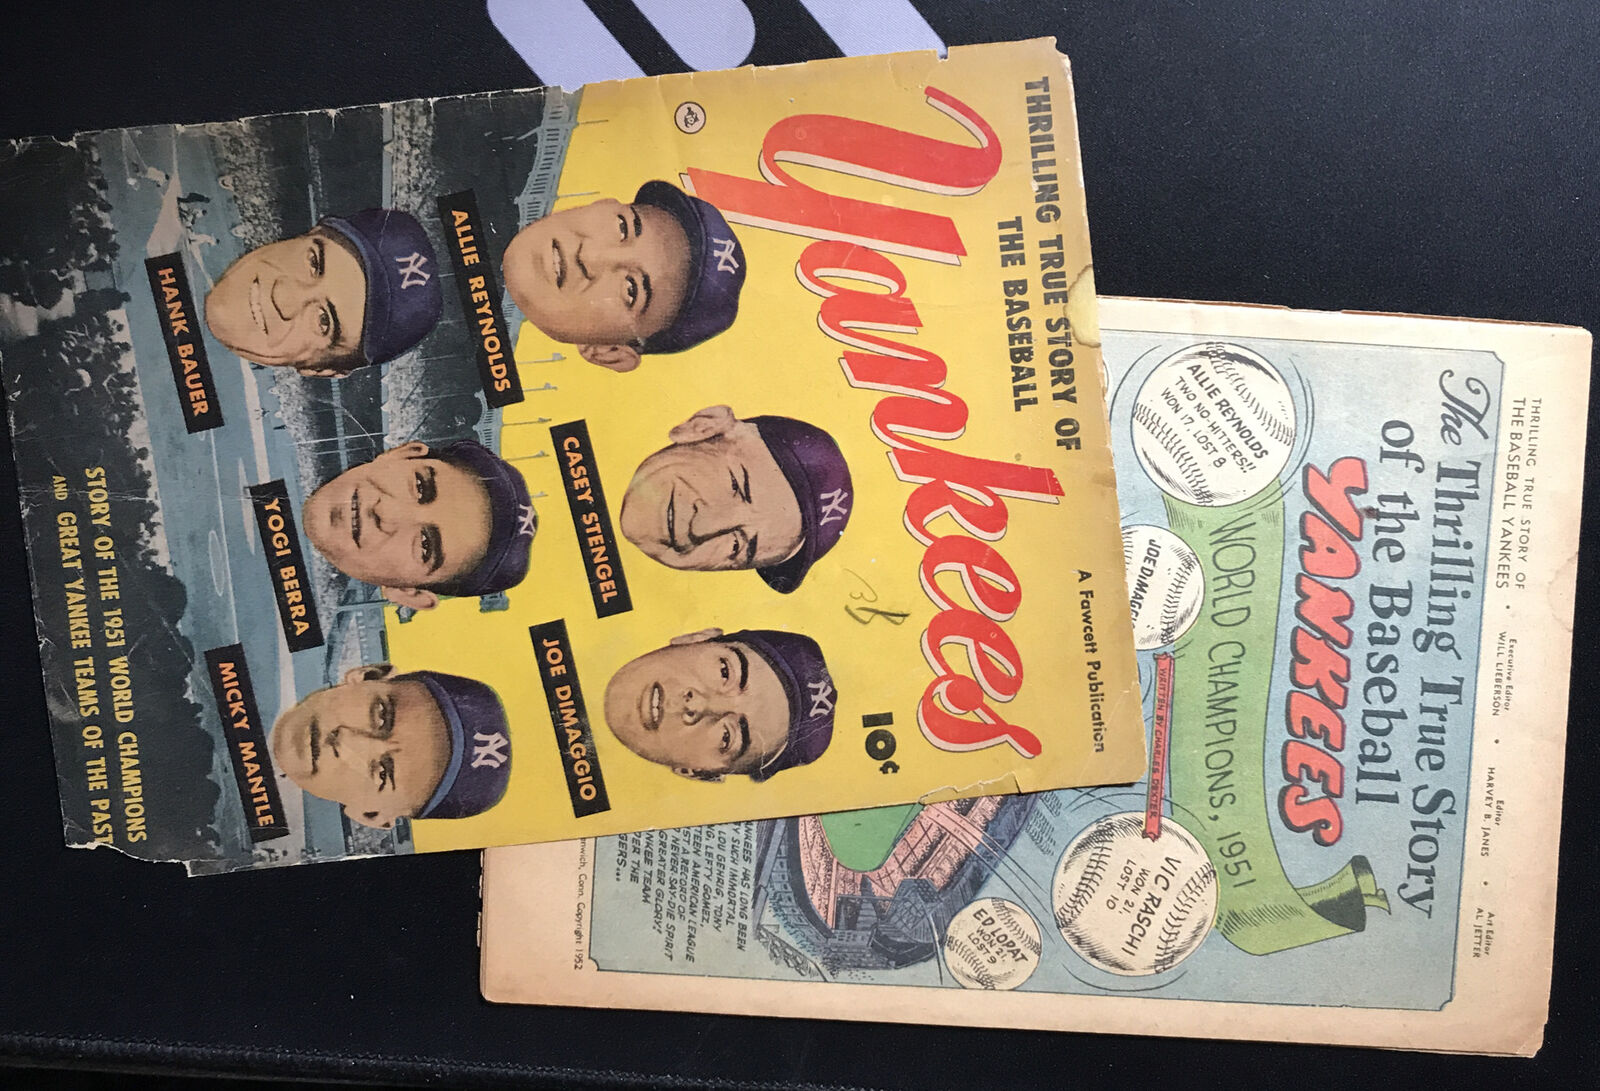 Thrilling True Story Of The Baseball Yankees . Story Of The 1951 World Champions